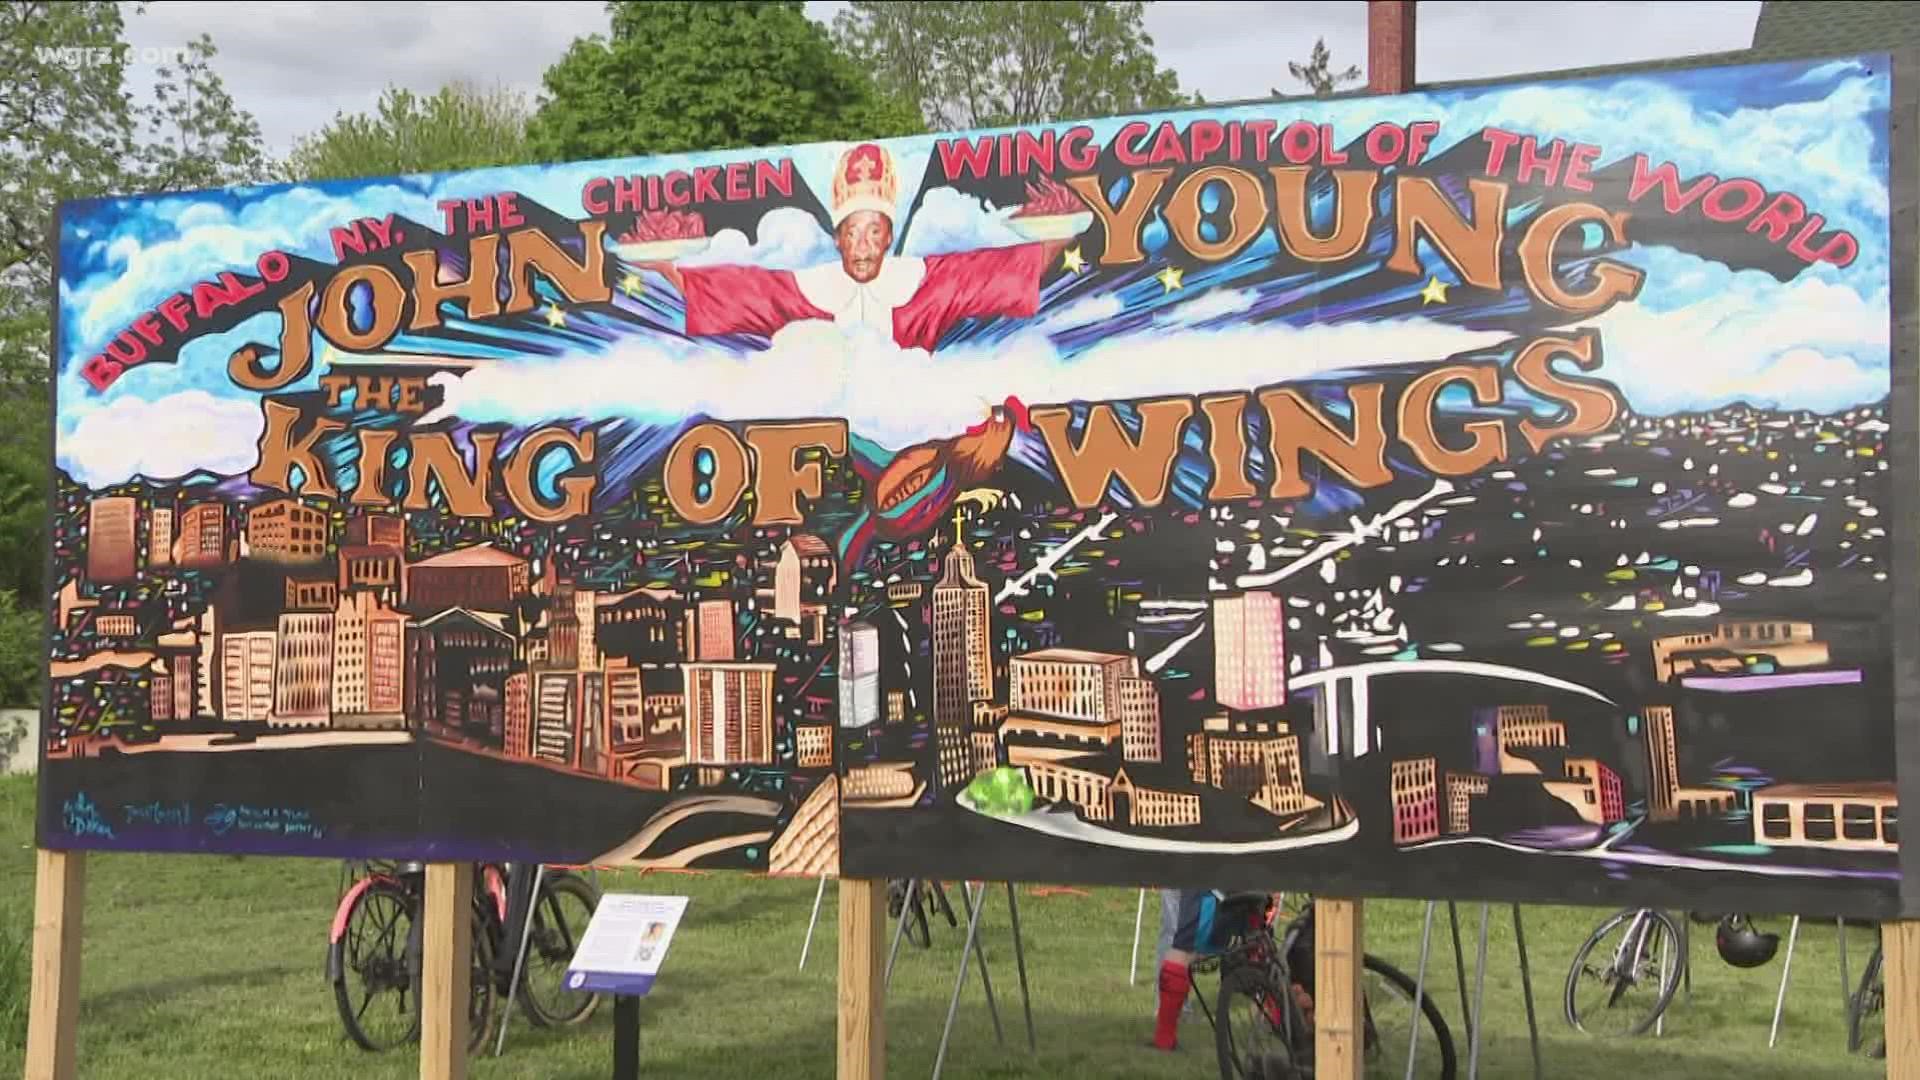 John Young opened Buffalo's first whole chicken wing restaurant "Wings N Things" back in the 1960s.